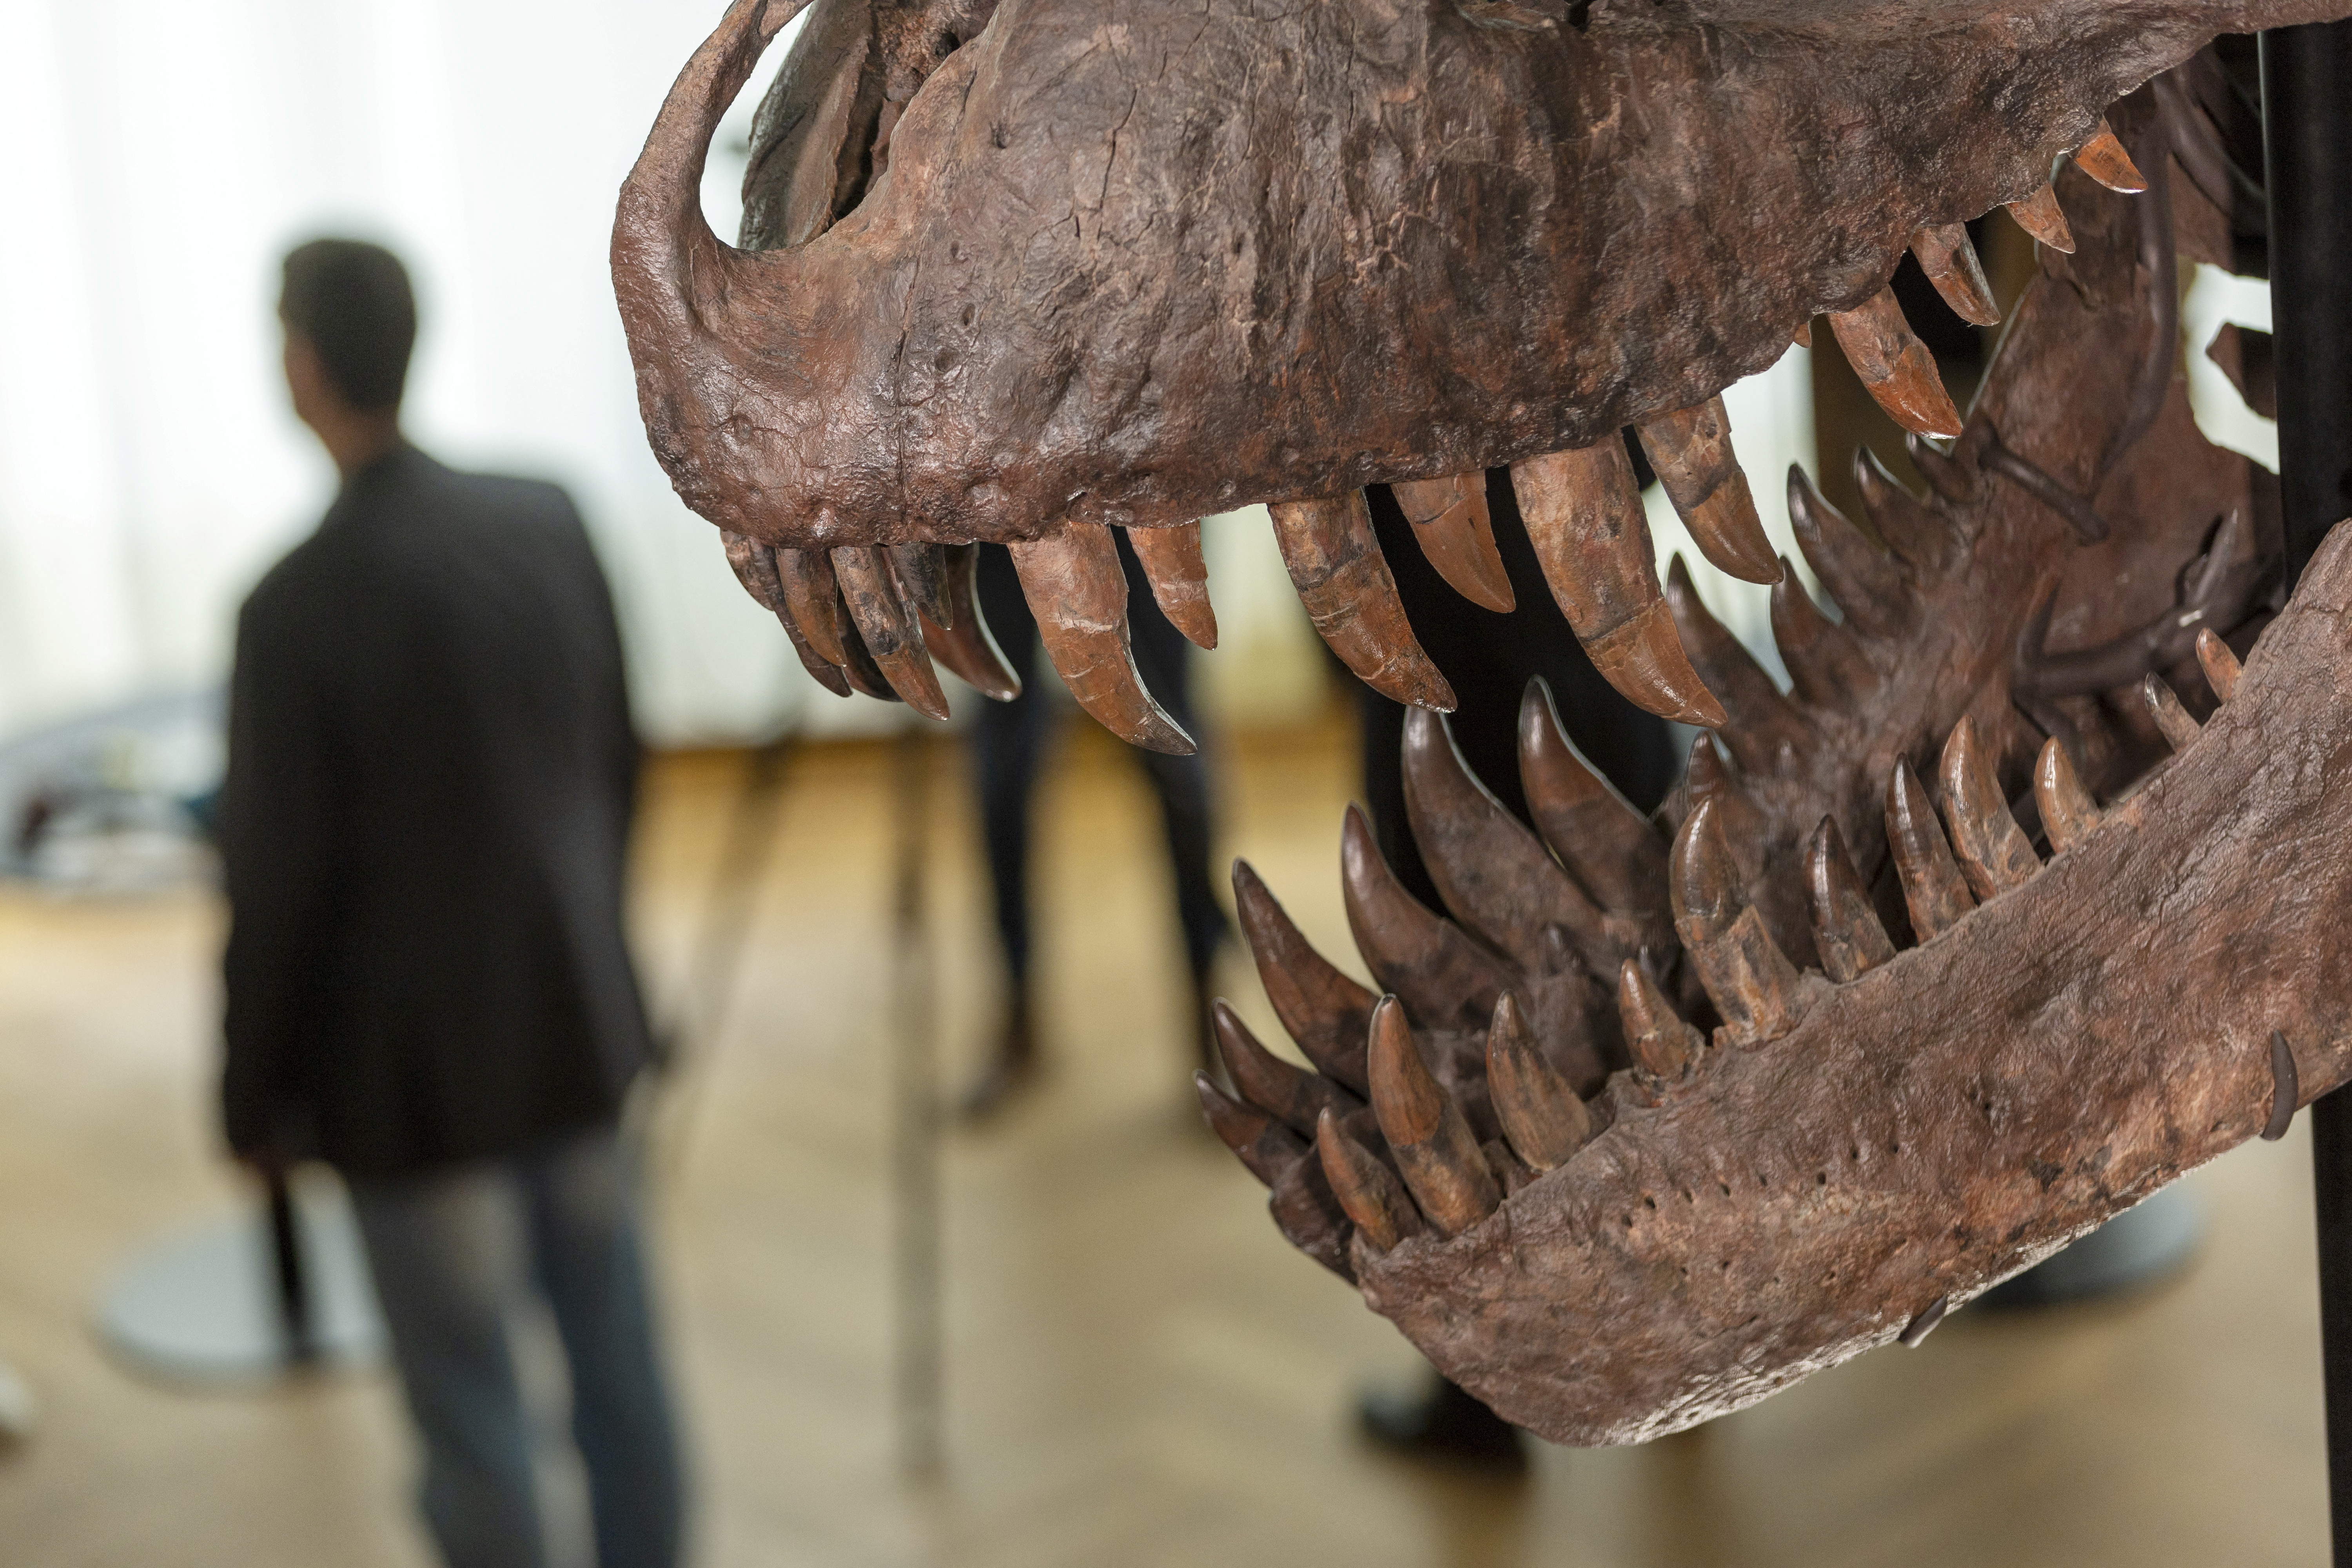 T-Rex skeleton sells for more than $6 mln at Swiss auction